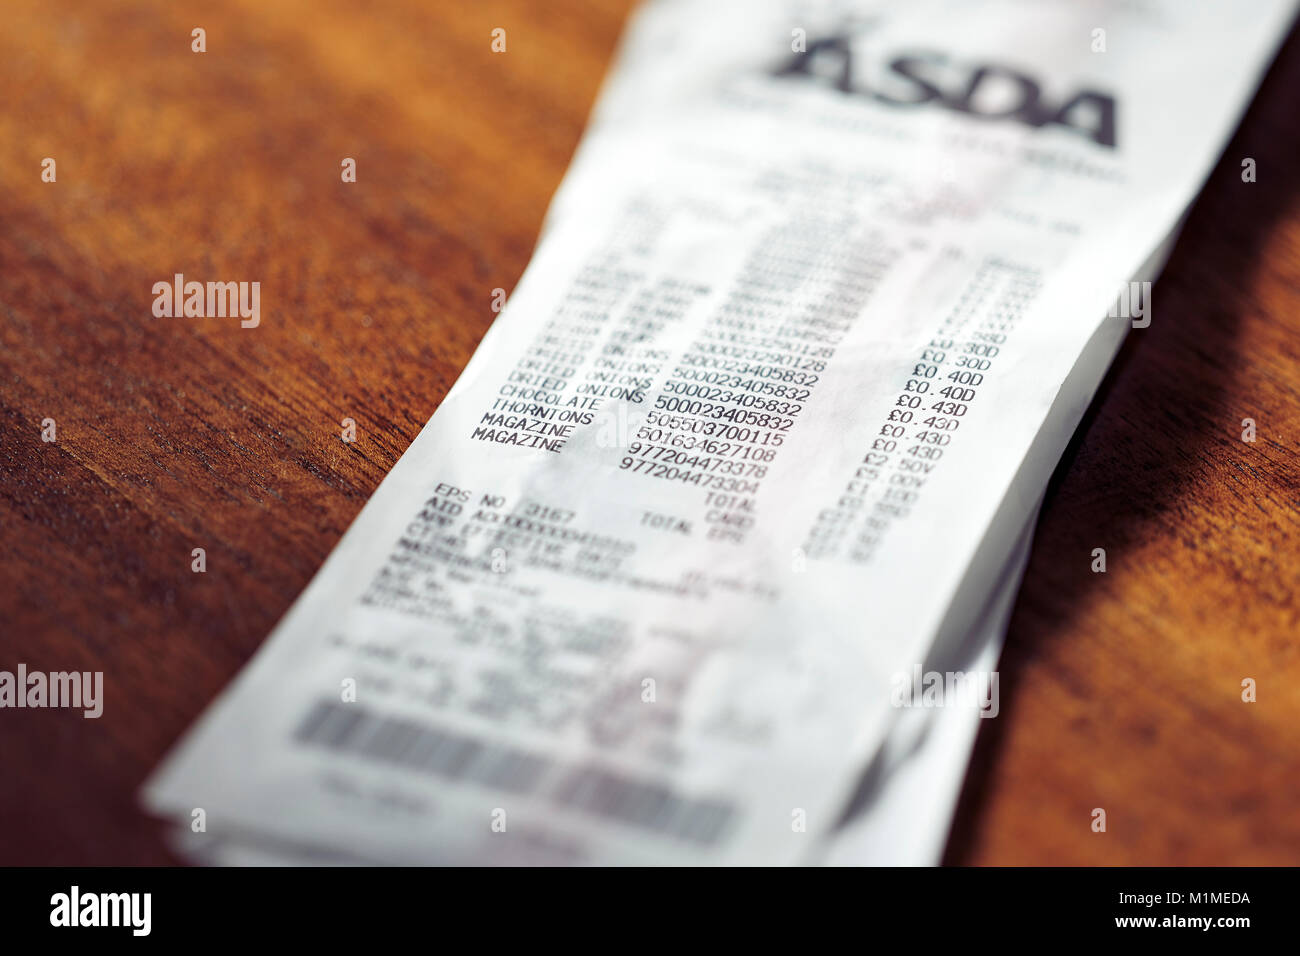 Close up of Till receipts Stock Photo